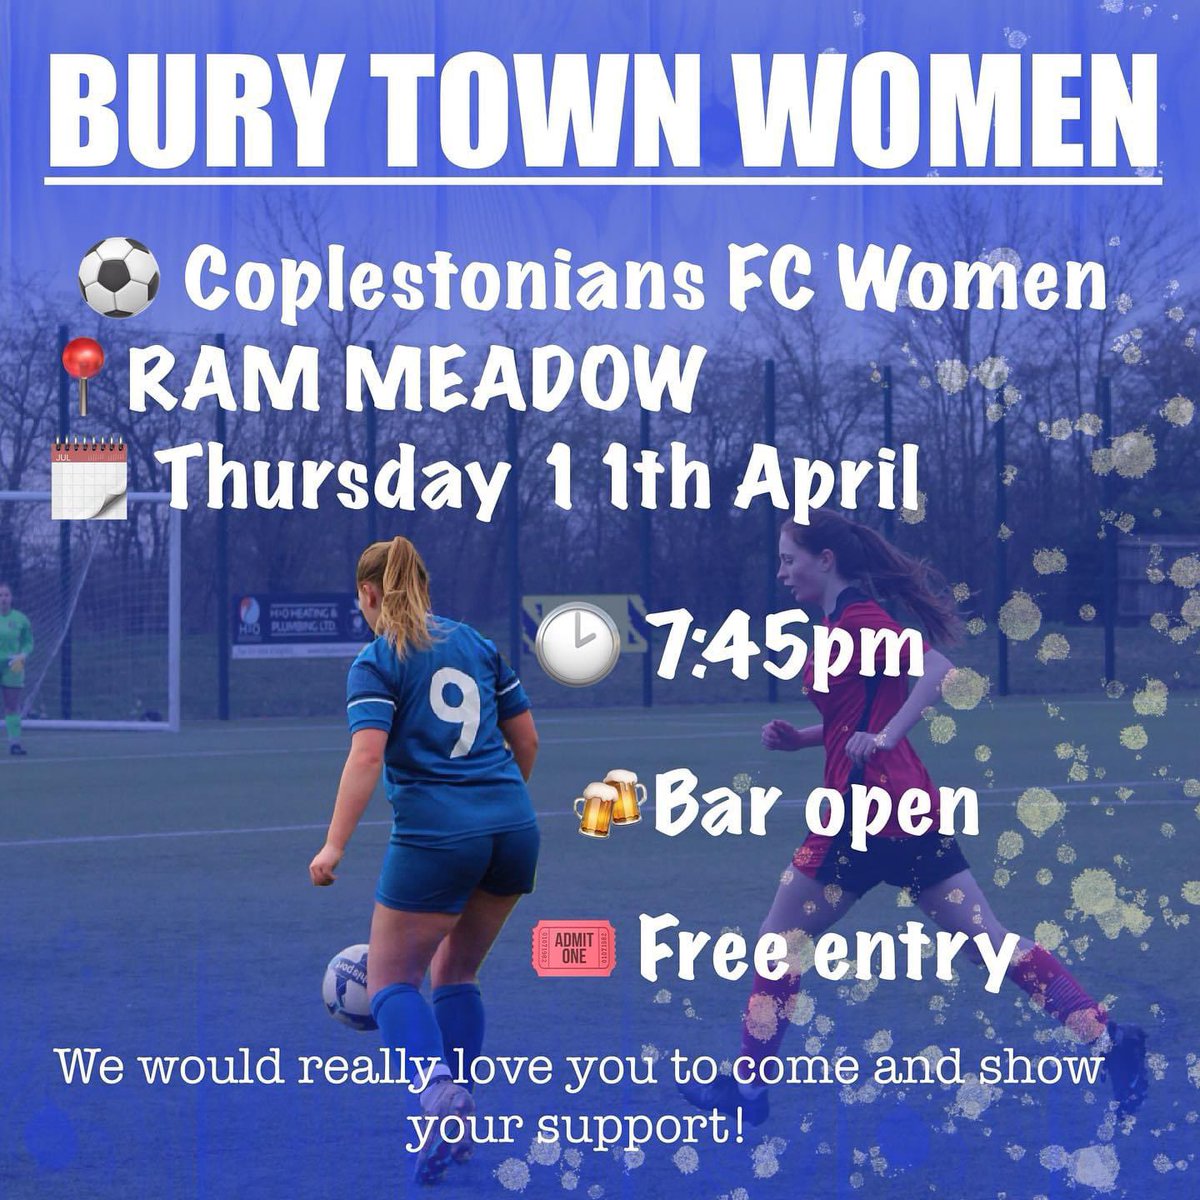 We are really excited to announce that our Women’s team will be playing at Ram meadow on Thursday 11th April, kick off 7:45pm We would really love to see as much support as possible! Entry is free of charge and the bar is going to be open🍻 Please share #burytowncommuintyfc